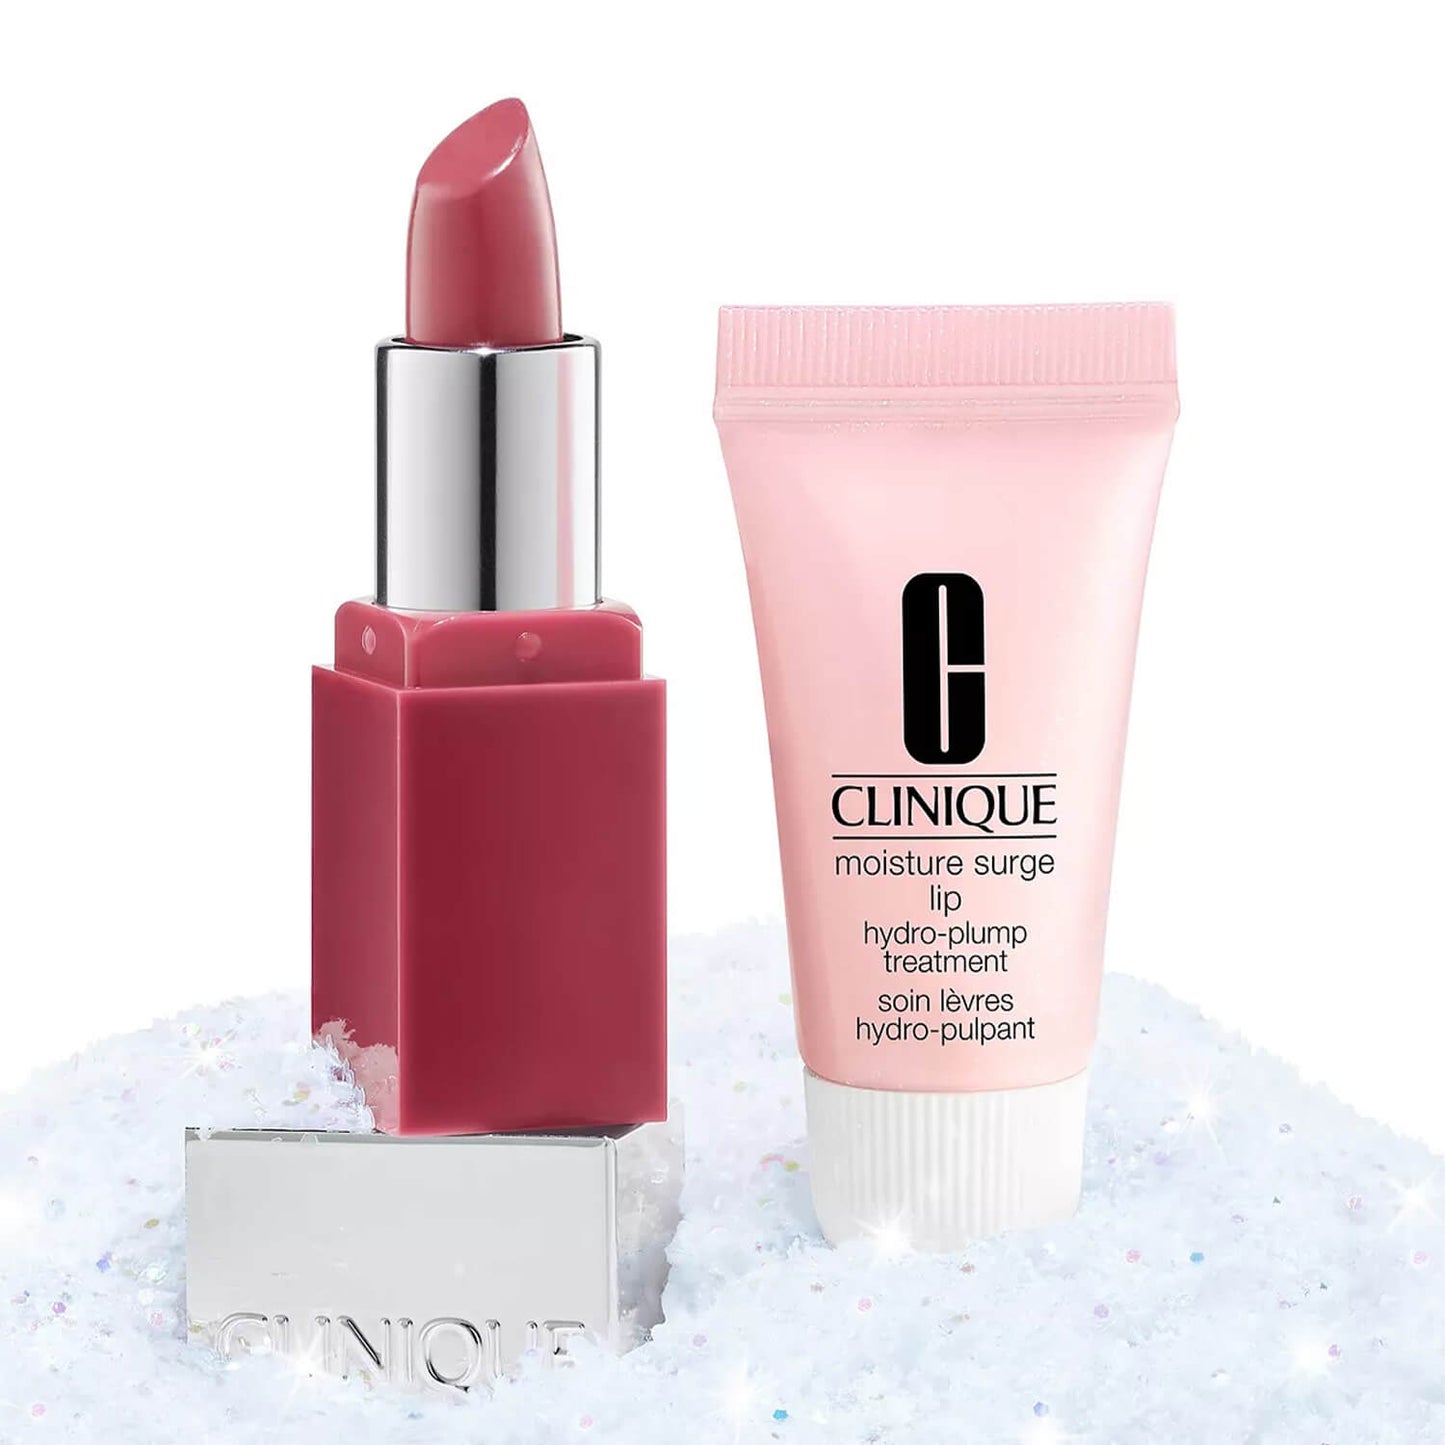 Shop Clinique lipstick gift set for HER available at Heygirl.pk for delivery in Pakistan.